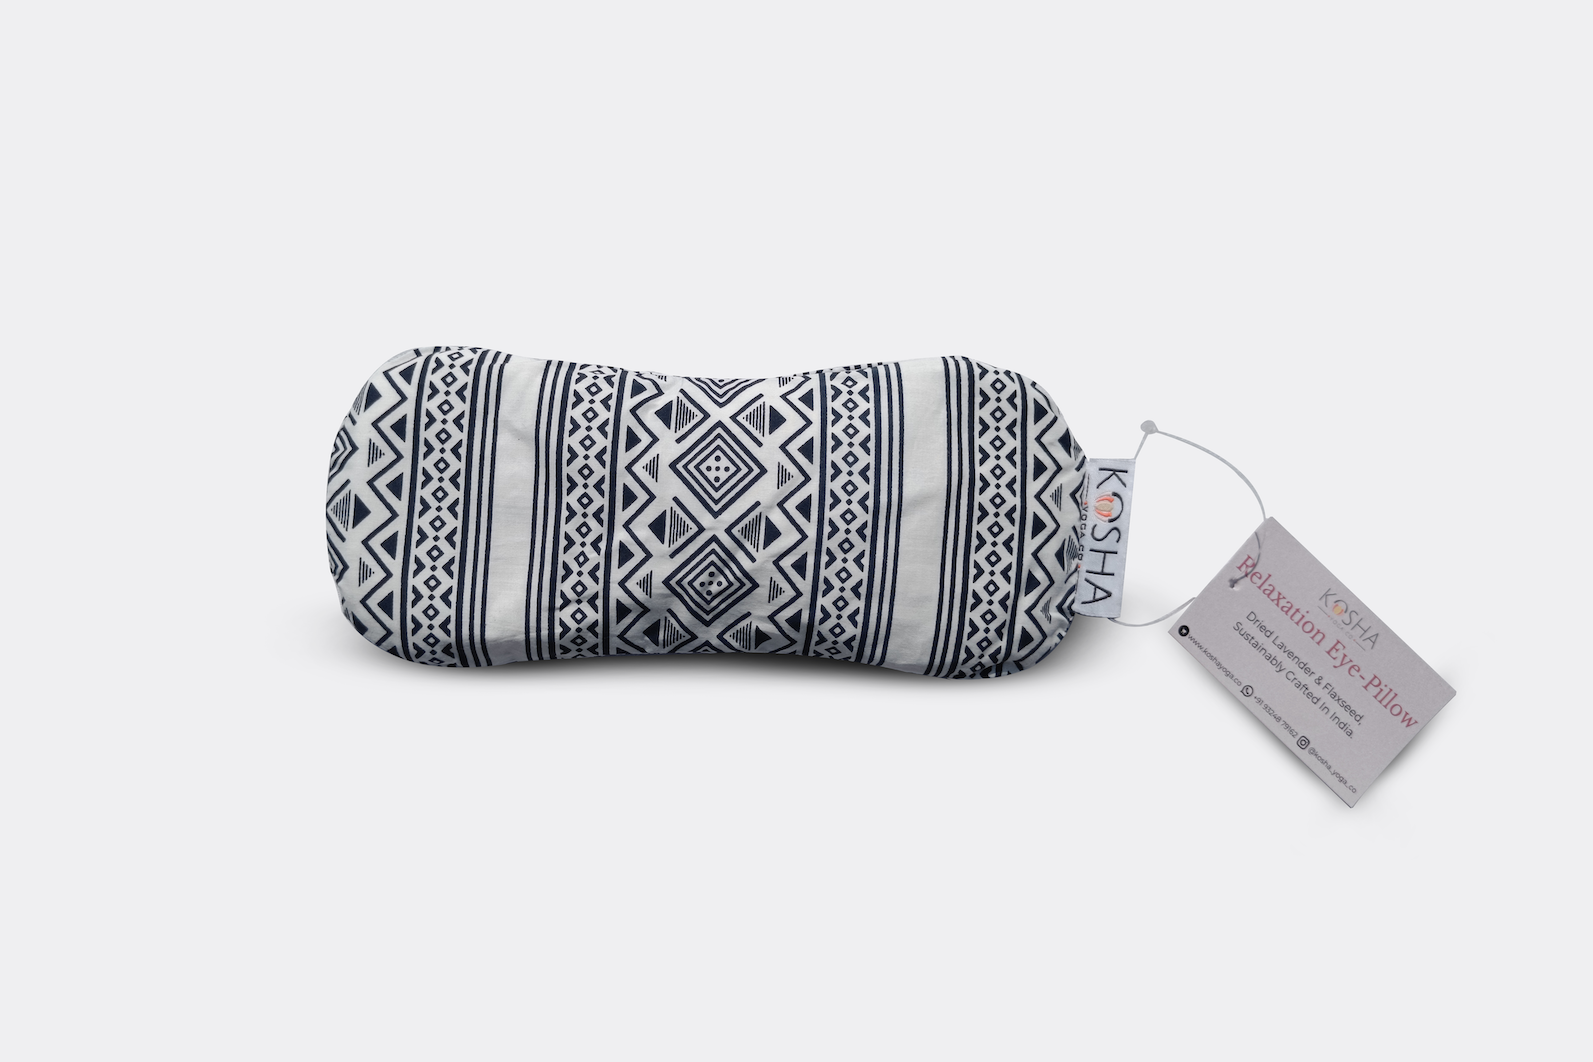 Organic Cotton relaxation eye pillow with lavender and flaxseed by kosha yoga co